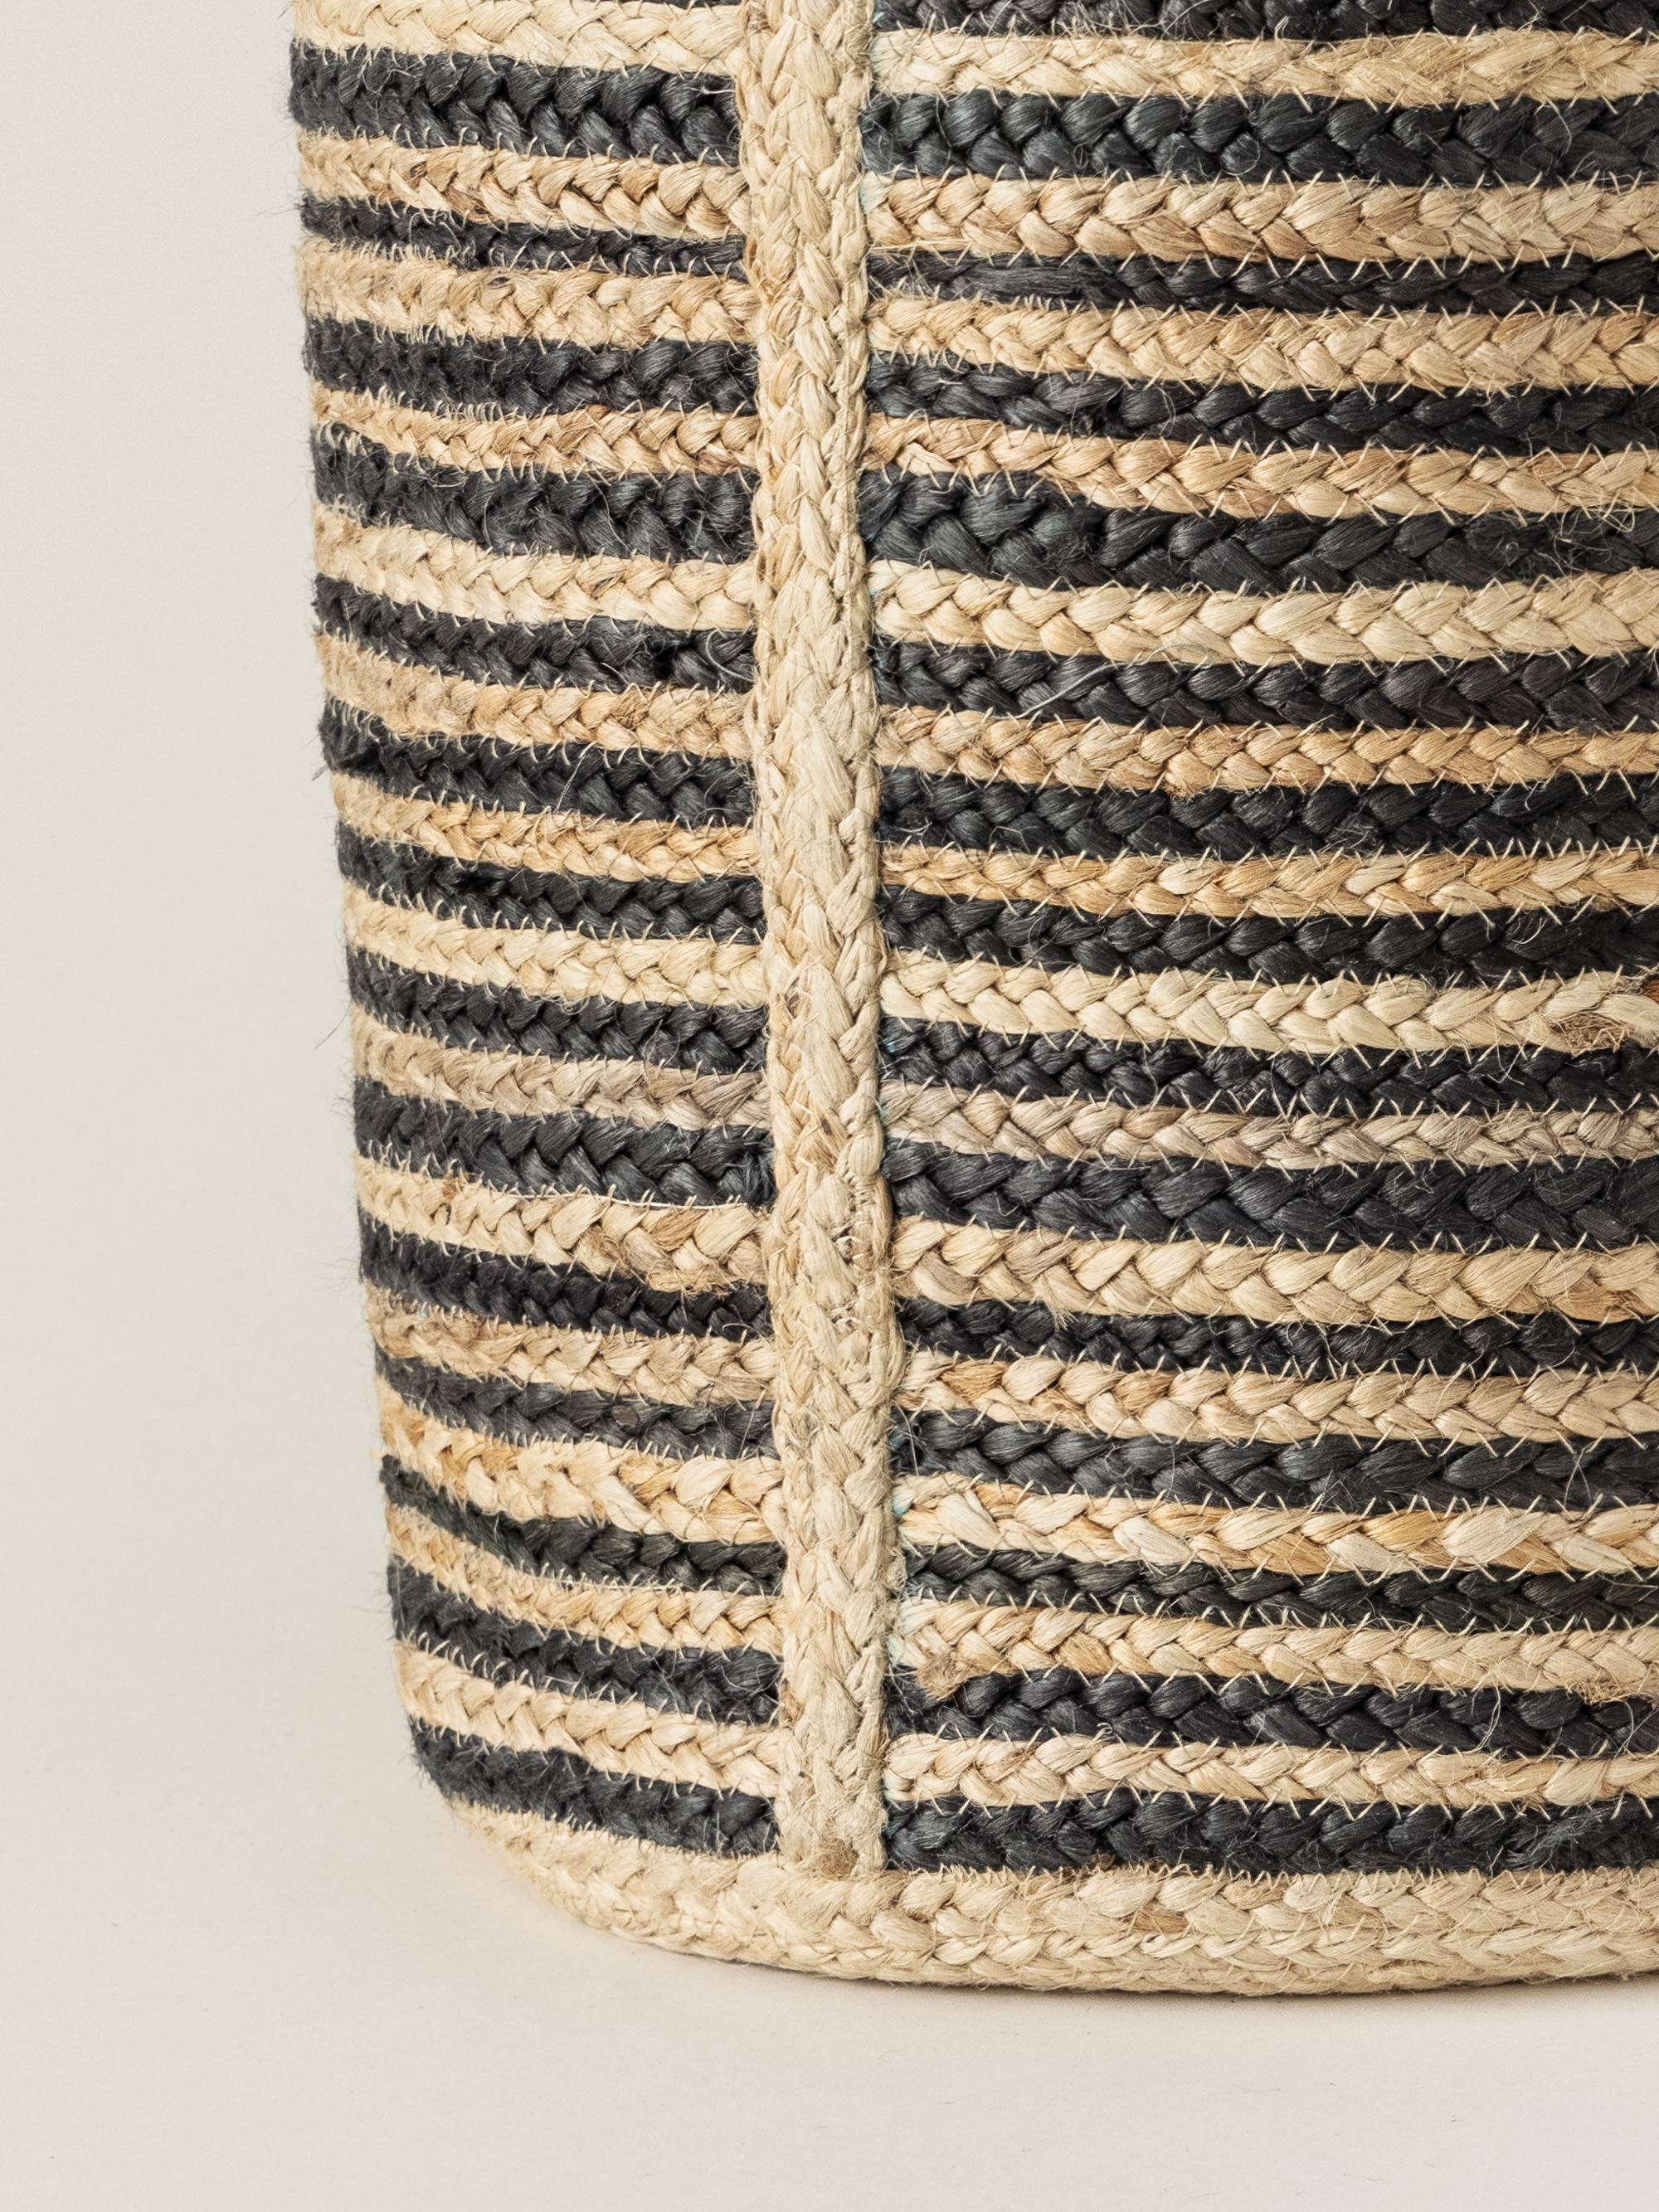 Striped Basket With Handles